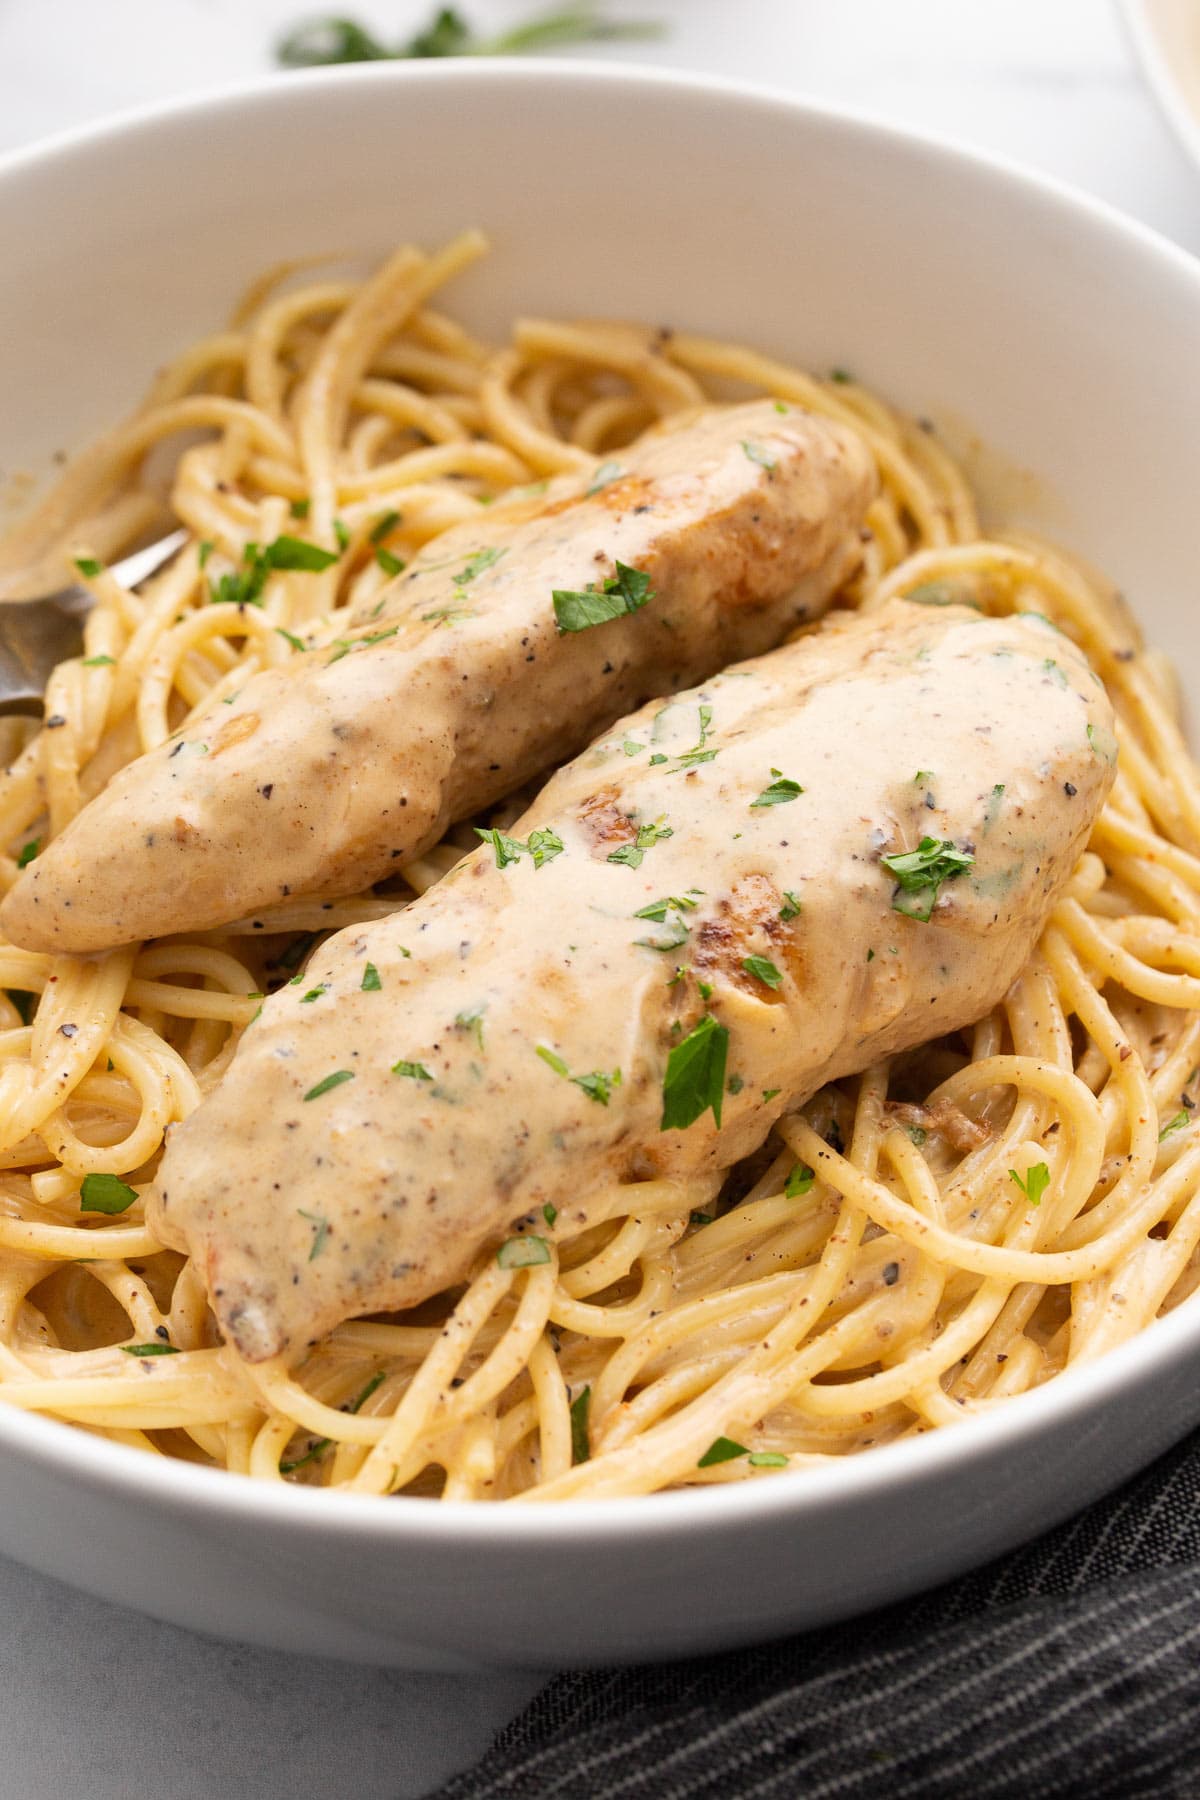 Two chicken tenders over a bed of spaghetti topped with lots of cream sauce and chopped fresh parsley.